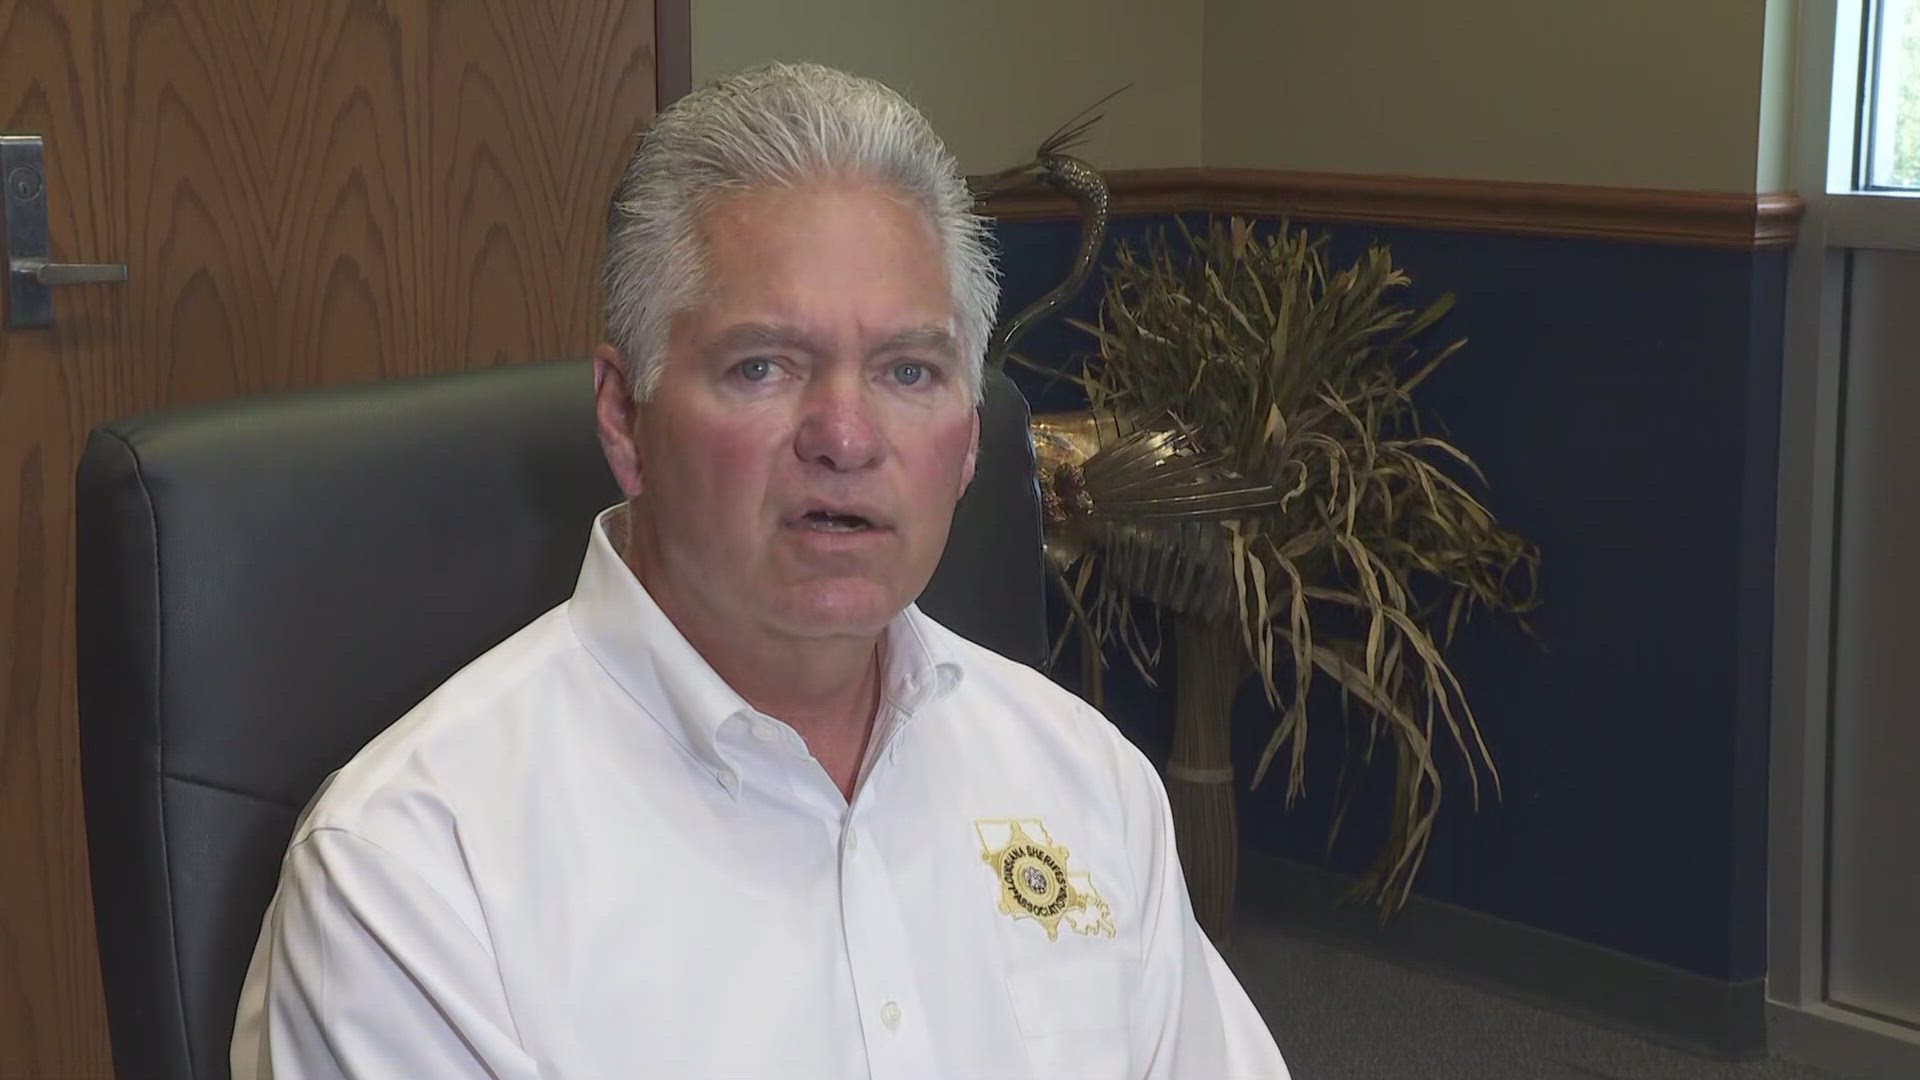 SBSO sheriff gives an update on their investigation into a missing person.